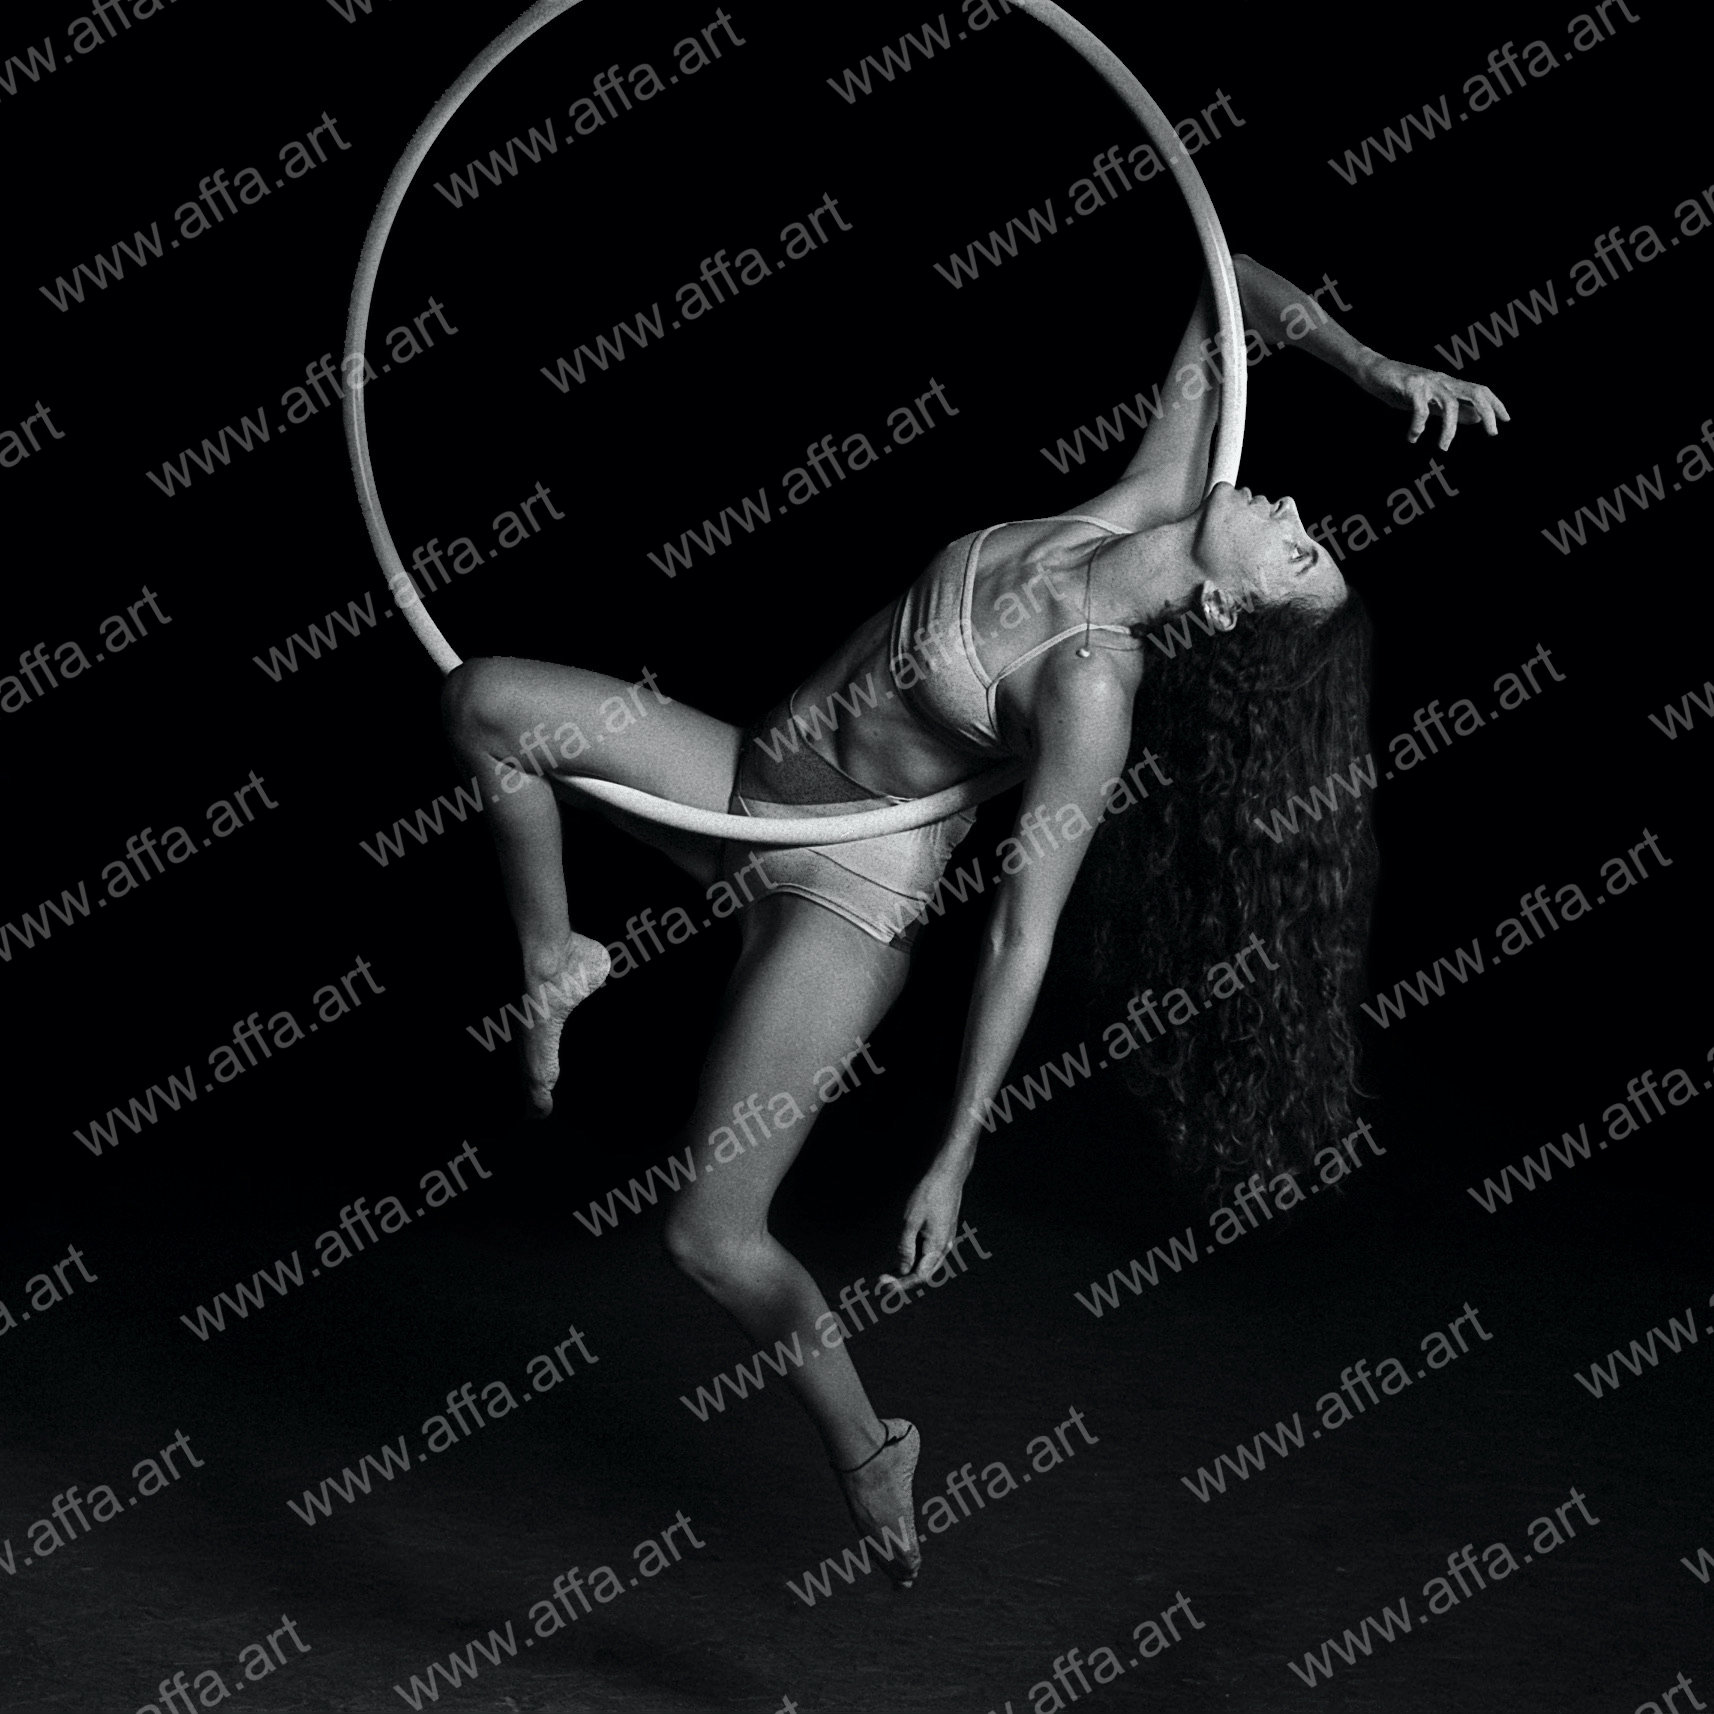 hoop anna 2 image with black and white